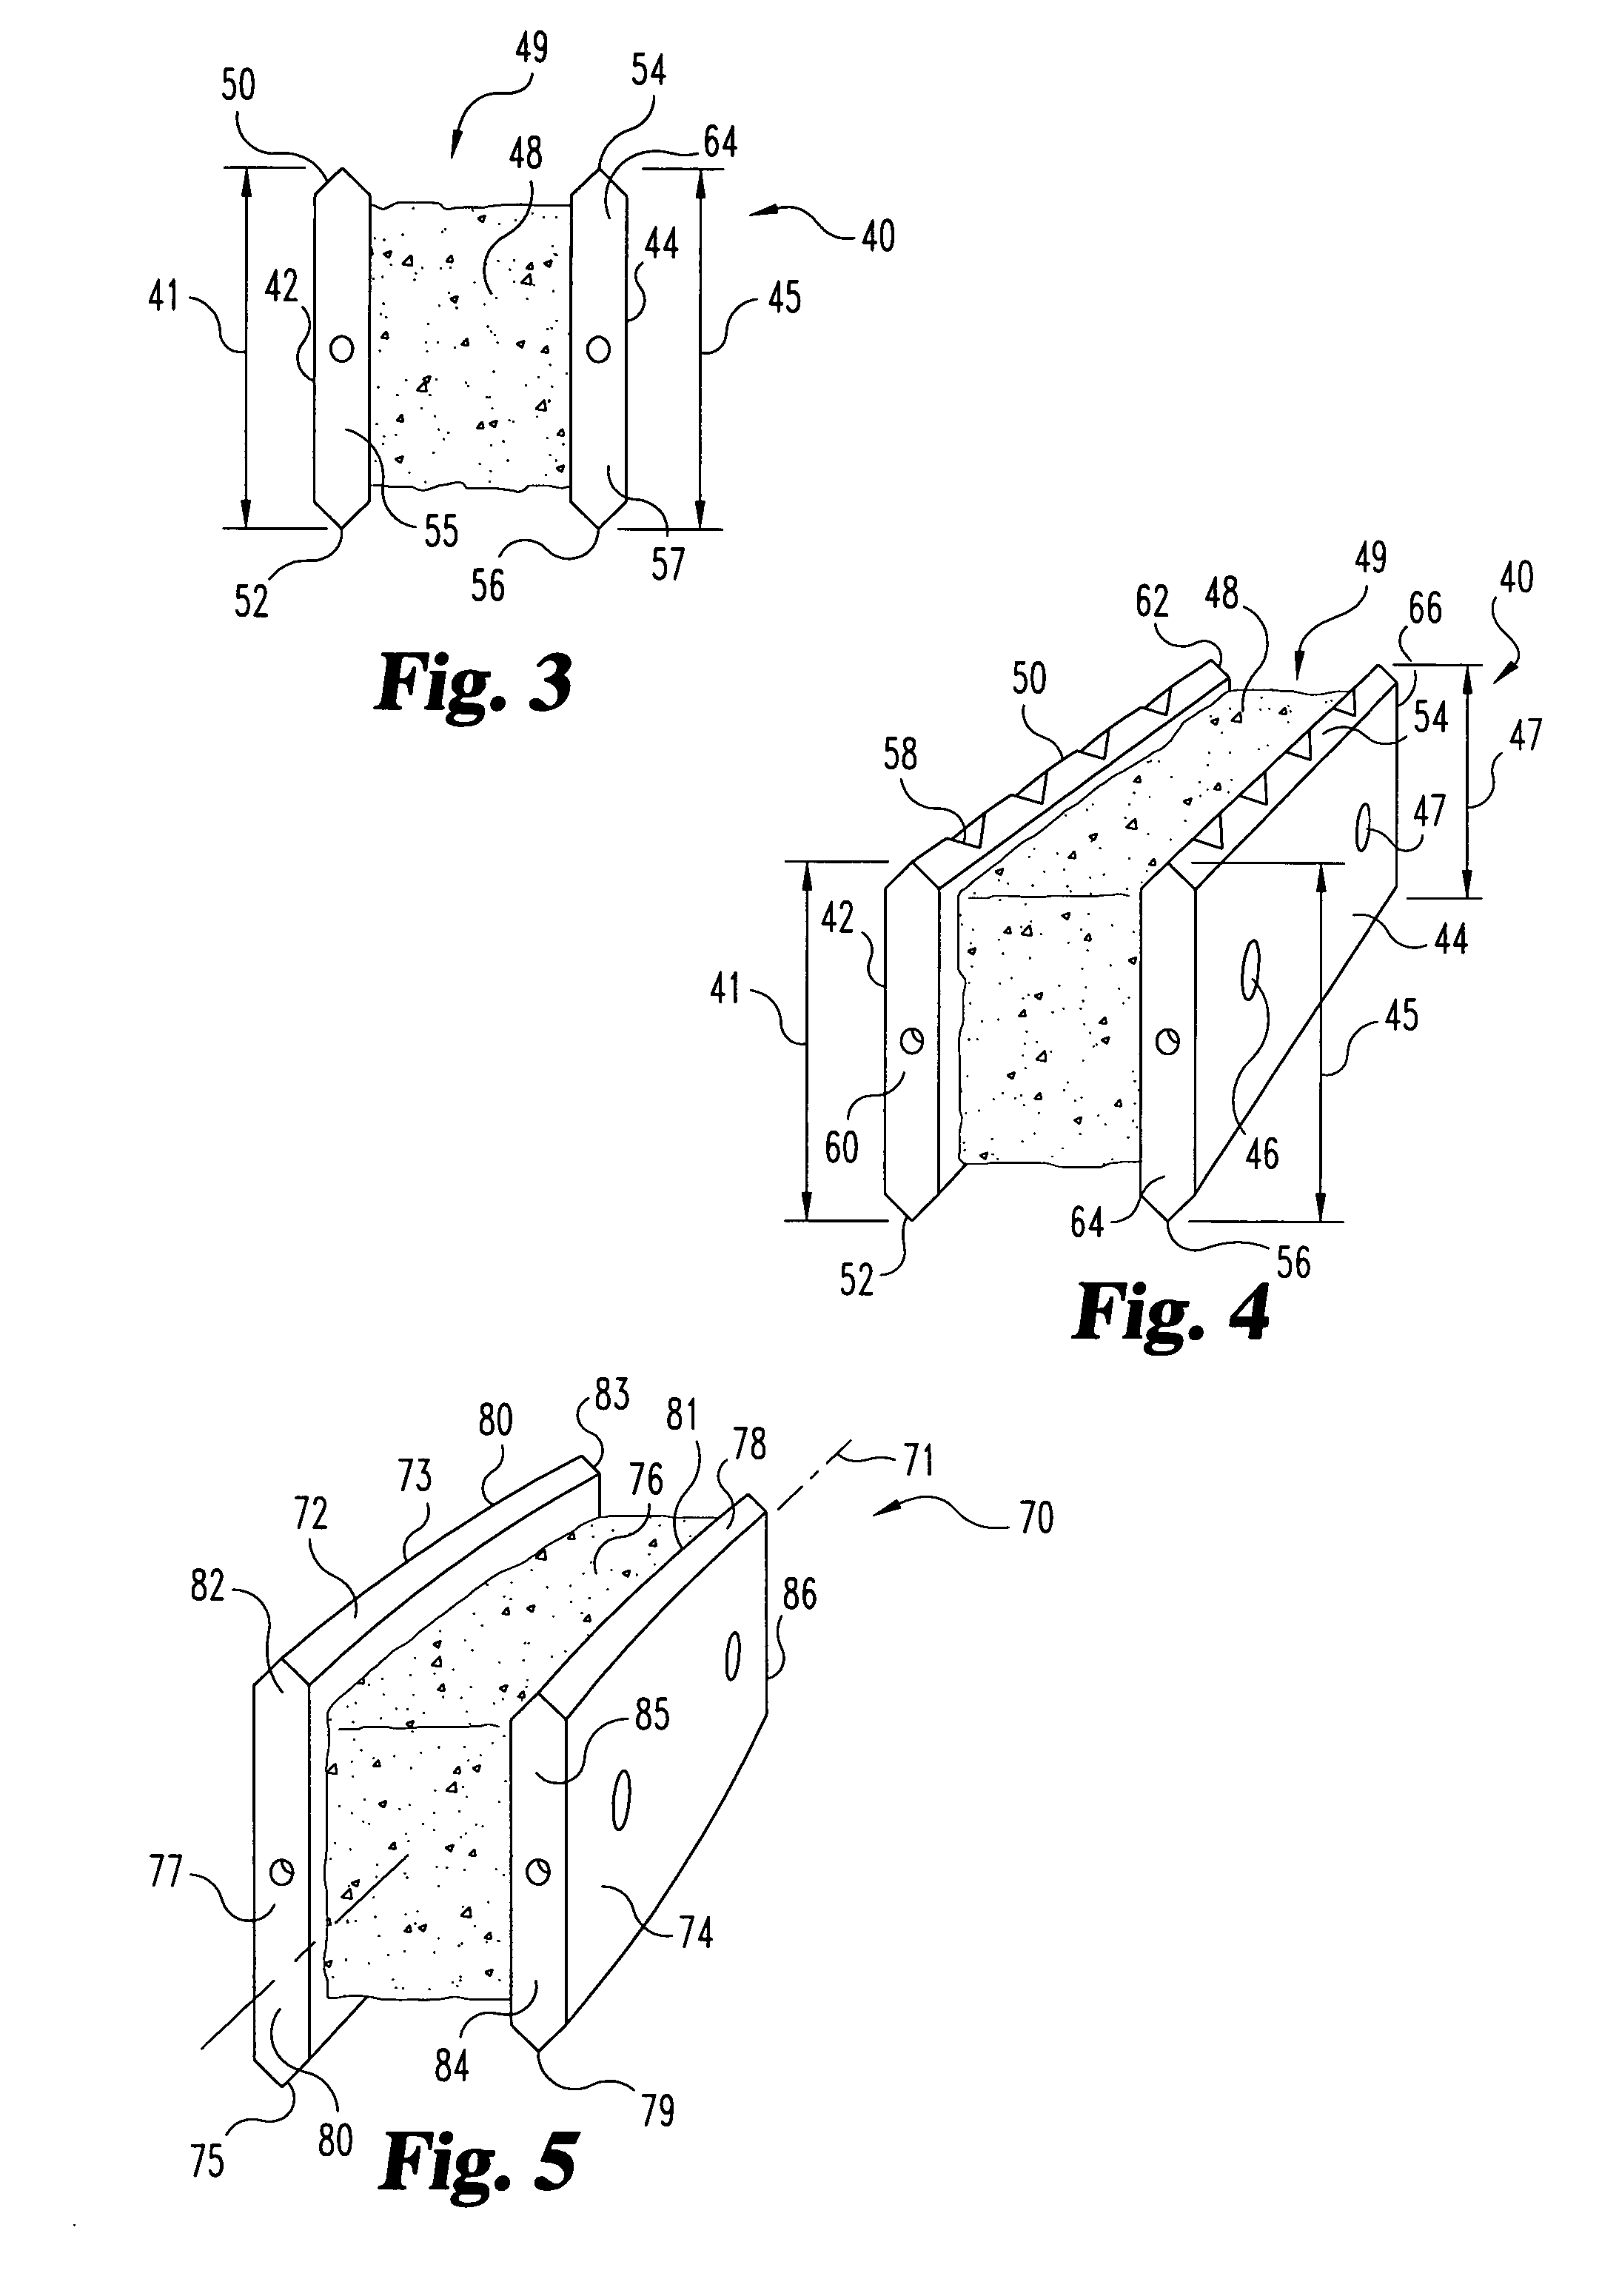 Reinforced molded implant formed of cortical bone